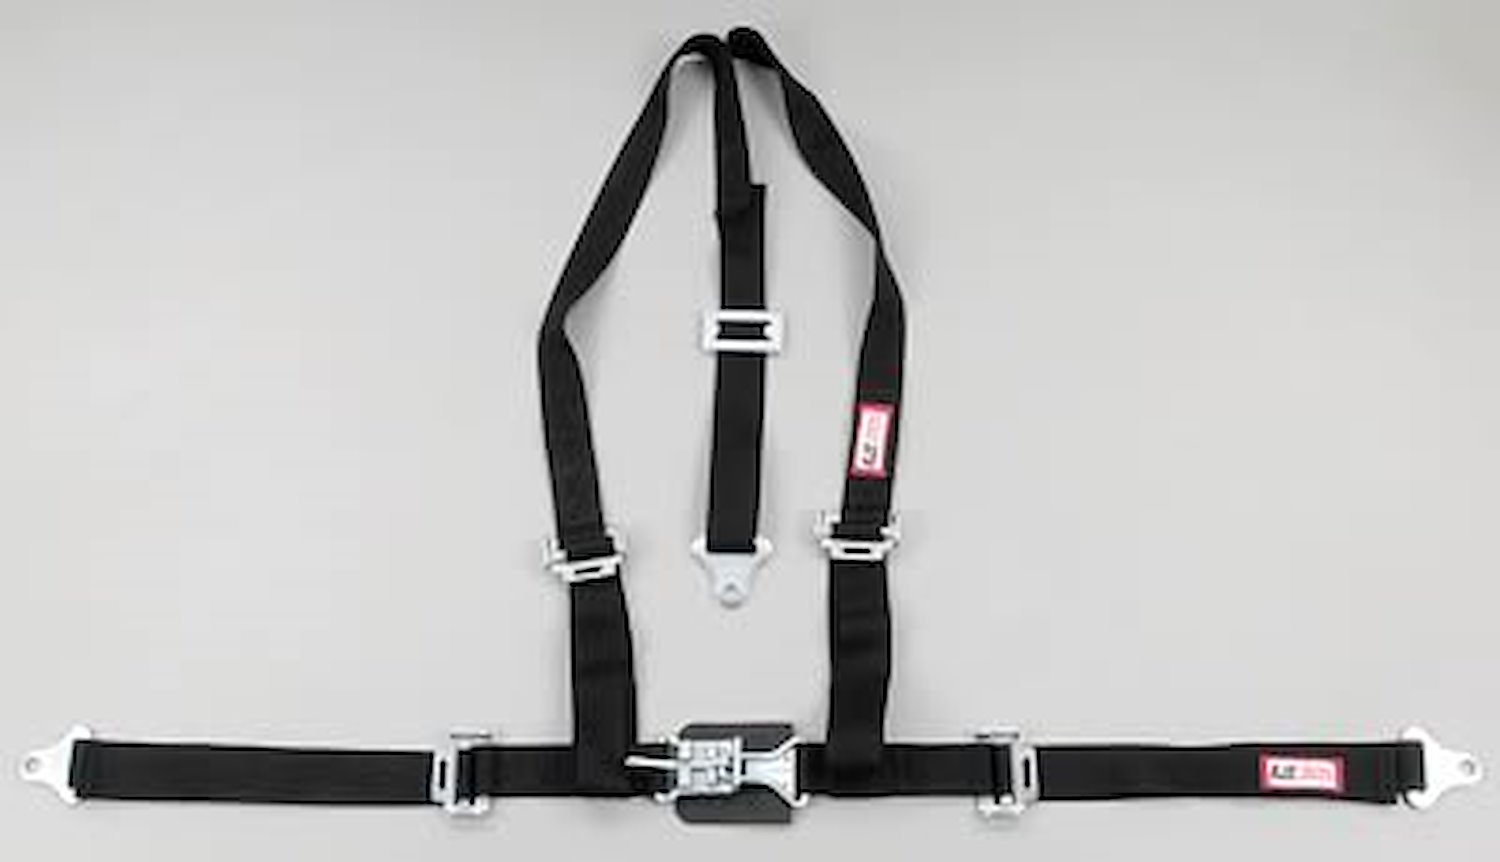 NON-SFI L&L HARNESS 3 PULL DOWN Lap Belt SEWN IN 2 S.H. Individual FLOOR Mount ALL WRAP ENDS BLACK